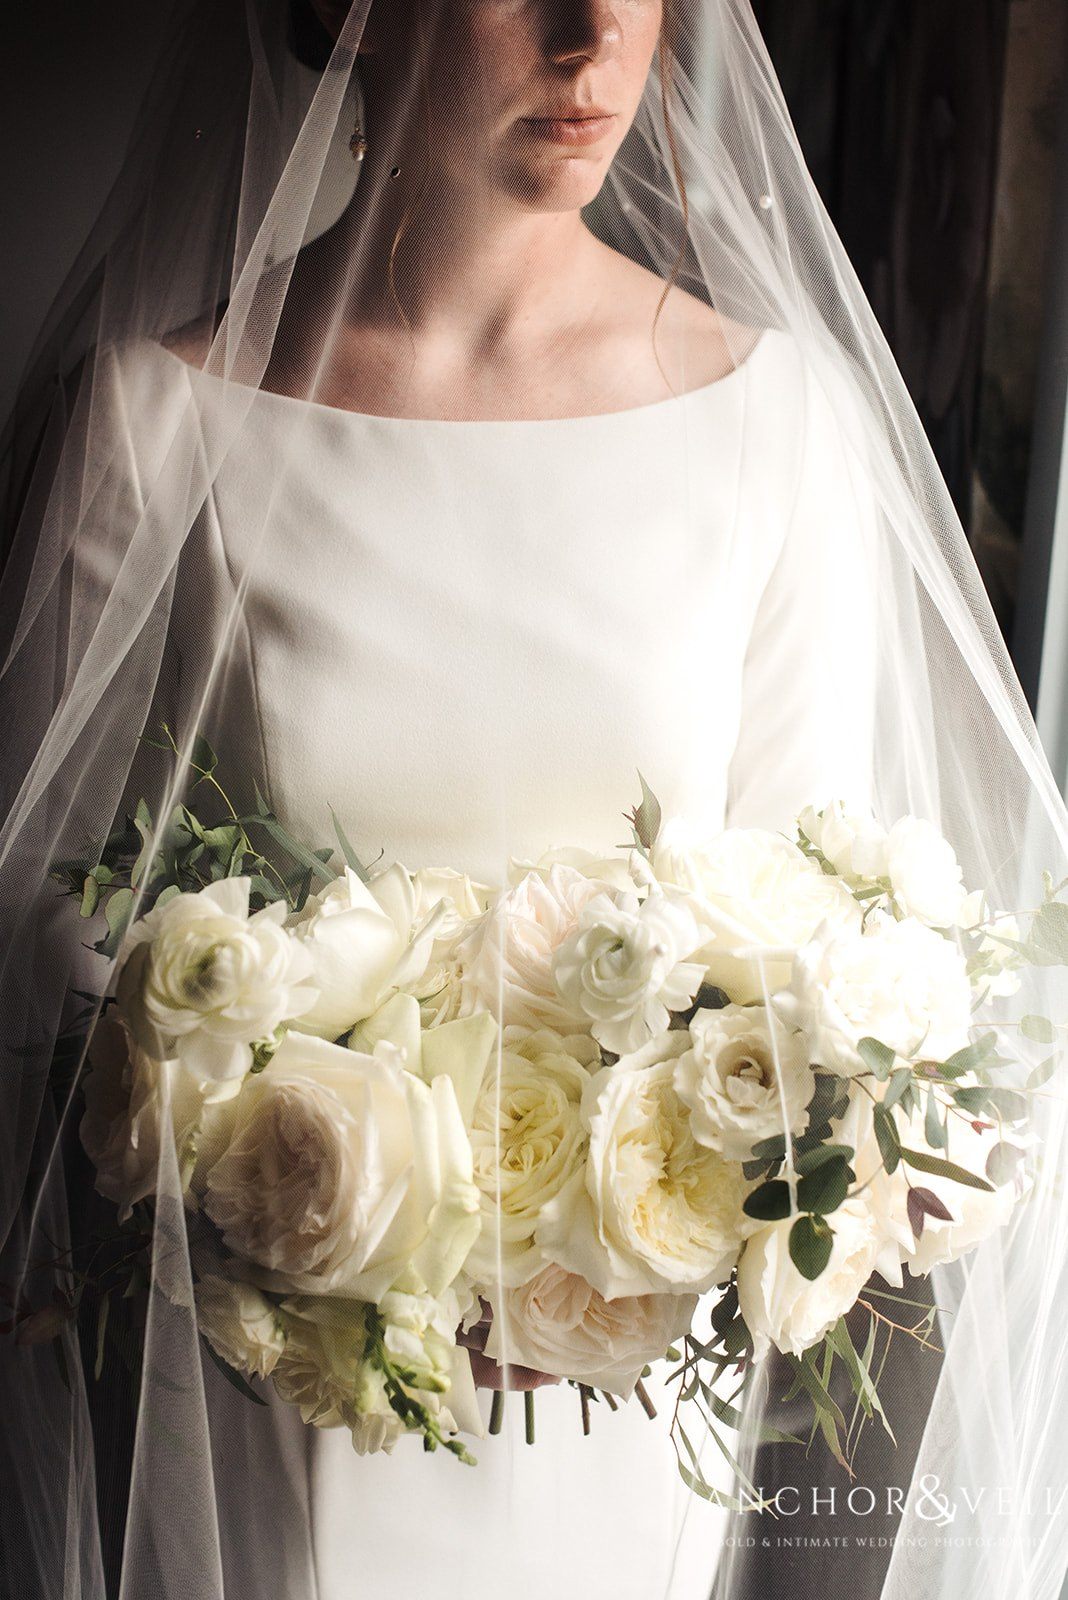 The bride under the veil with bridal bouquet at the Circle M Farms Wedding